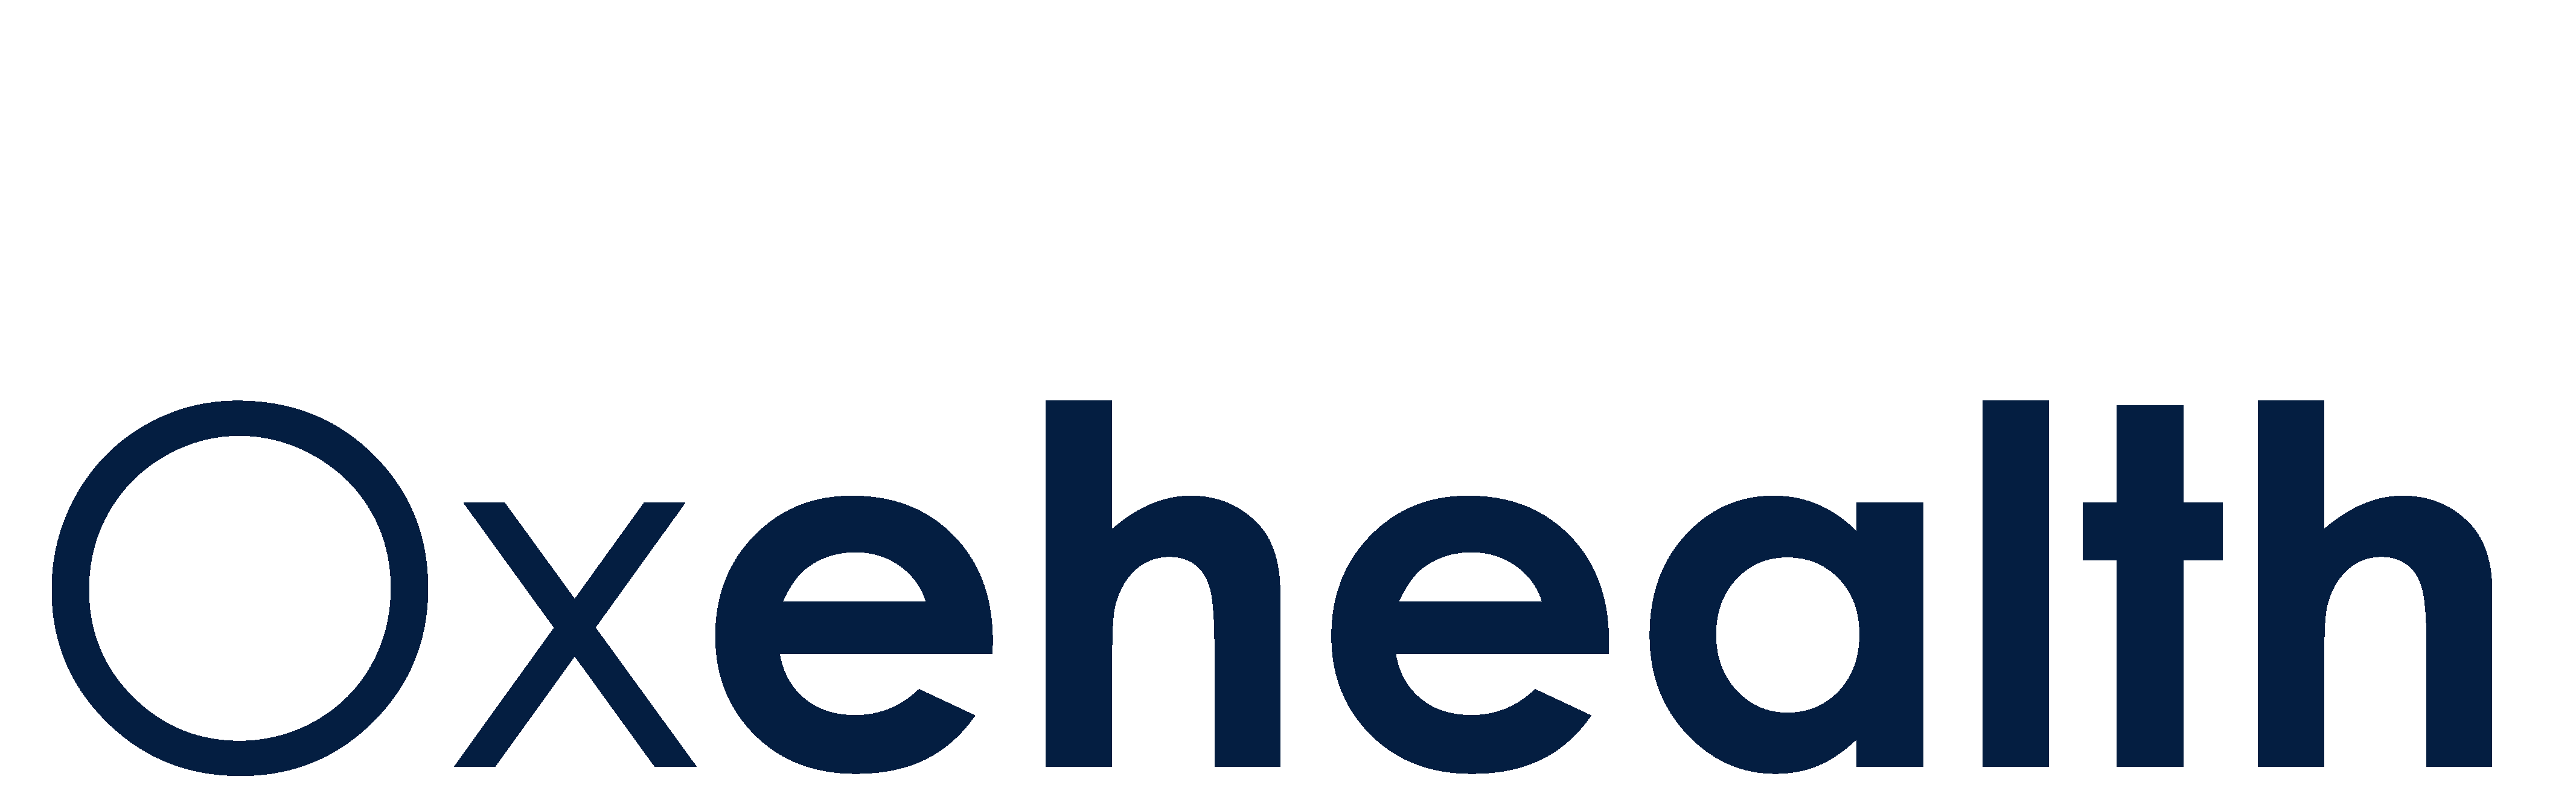 Oxehealth